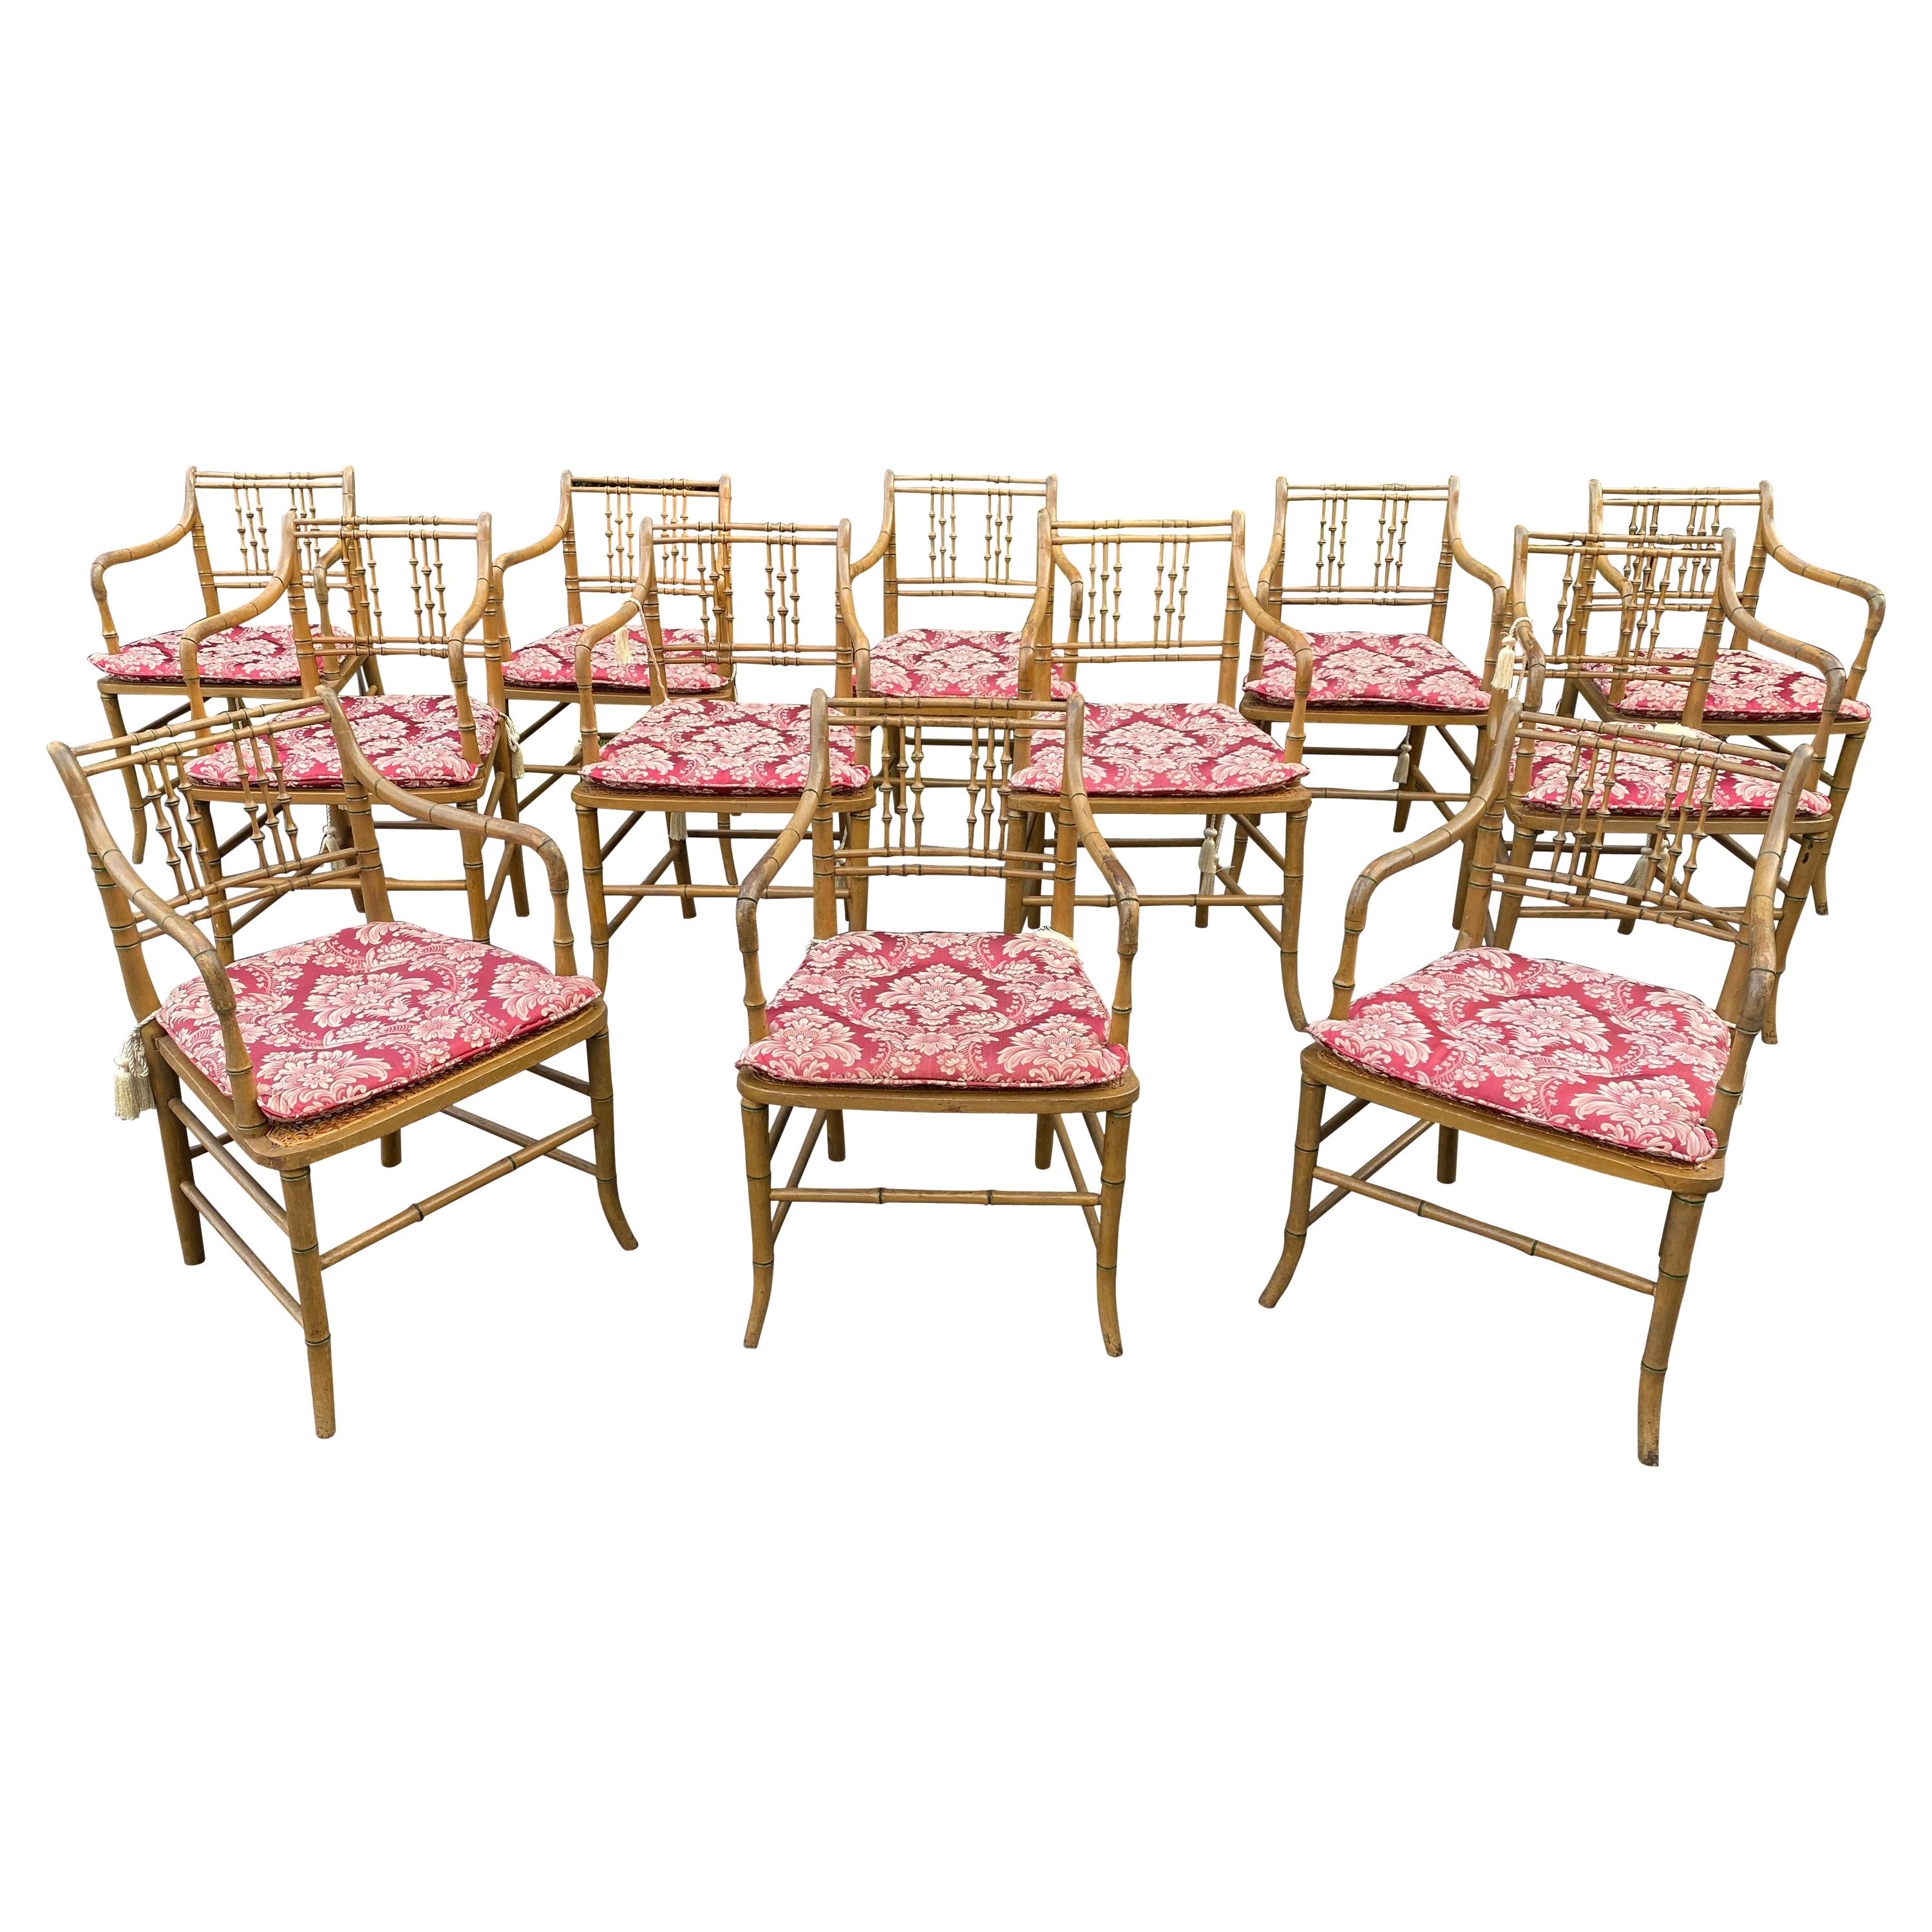 Great Set of 12 Paint Decorated 19th Century Faux Bamboo Armchairs For Sale